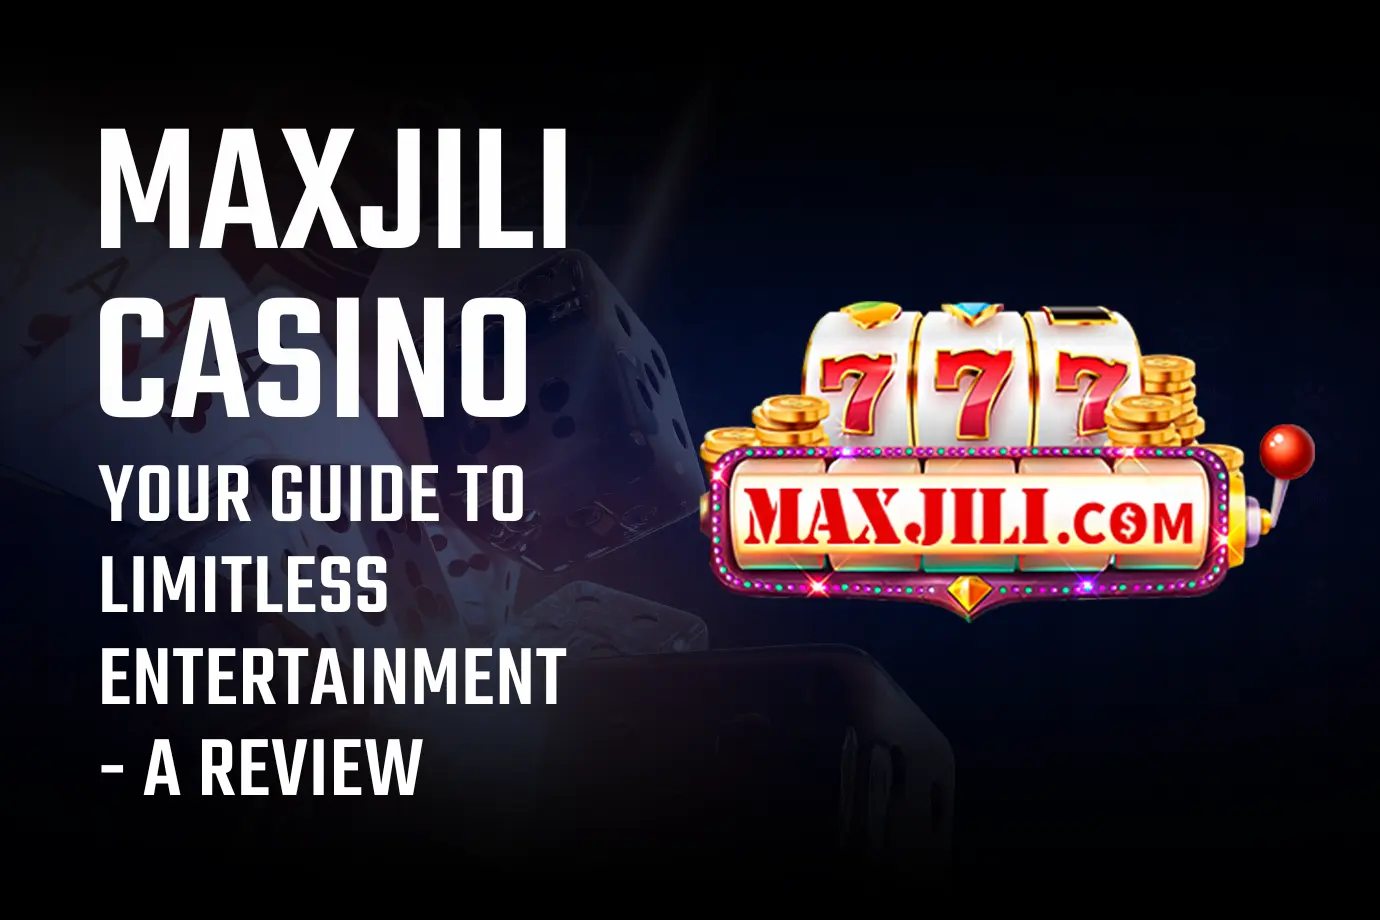 Maxjili Casino: Your Guide to Limitless Entertainment - A Review